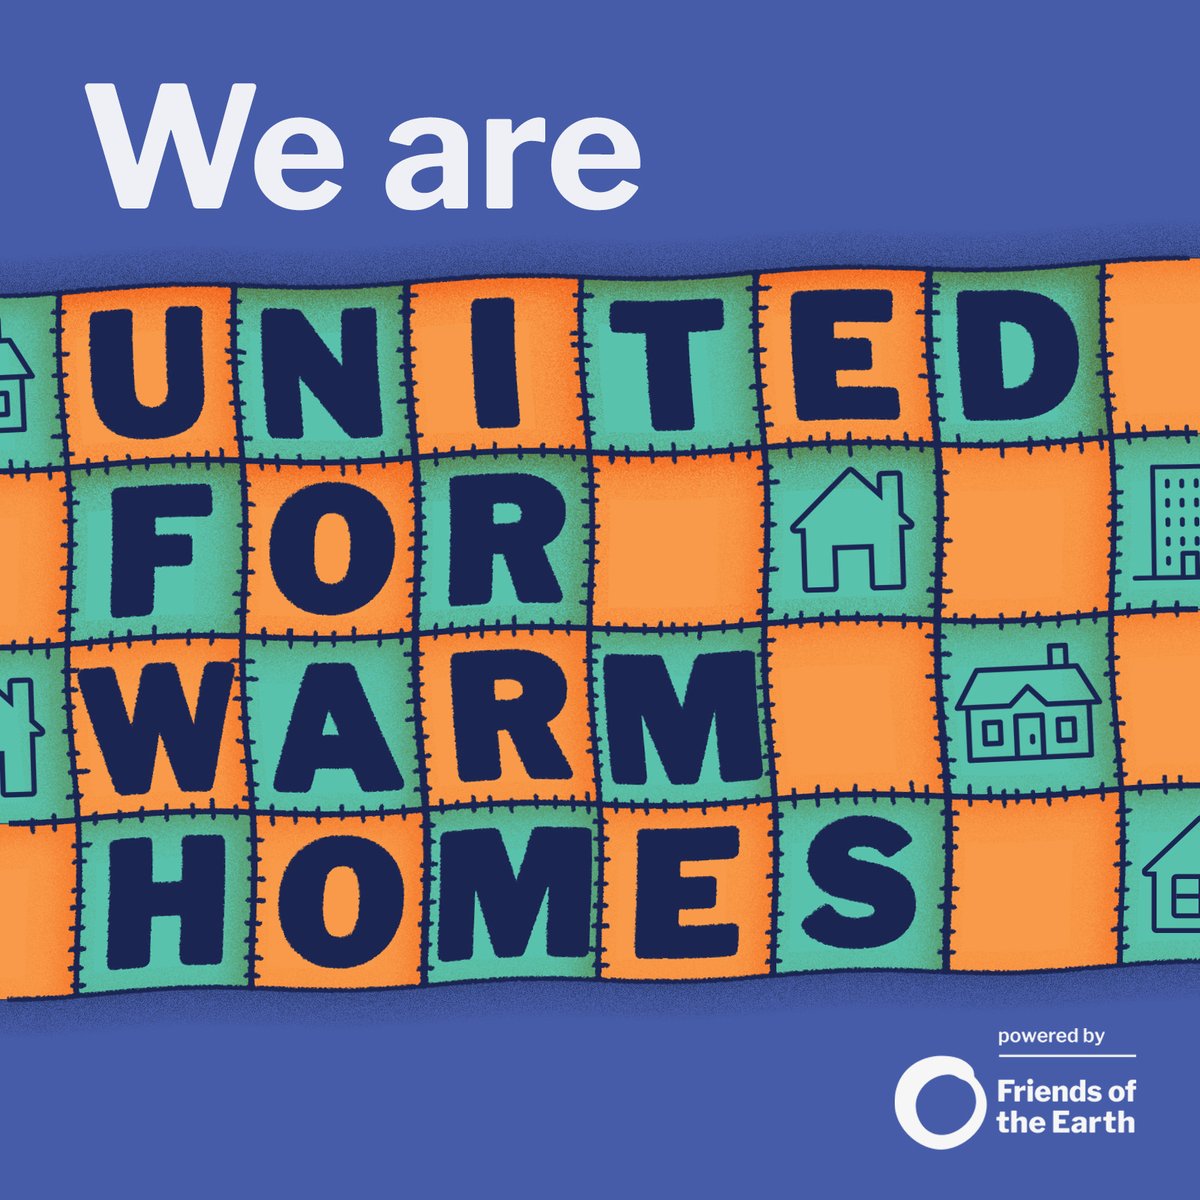 While energy firms make £1bn a week in profits, households struggle with energy bills that are still 60% higher than they were in 2021. And nearly 10 million people live in cold homes which make them miserable and ill. How can this be right? #leftoutinthecold